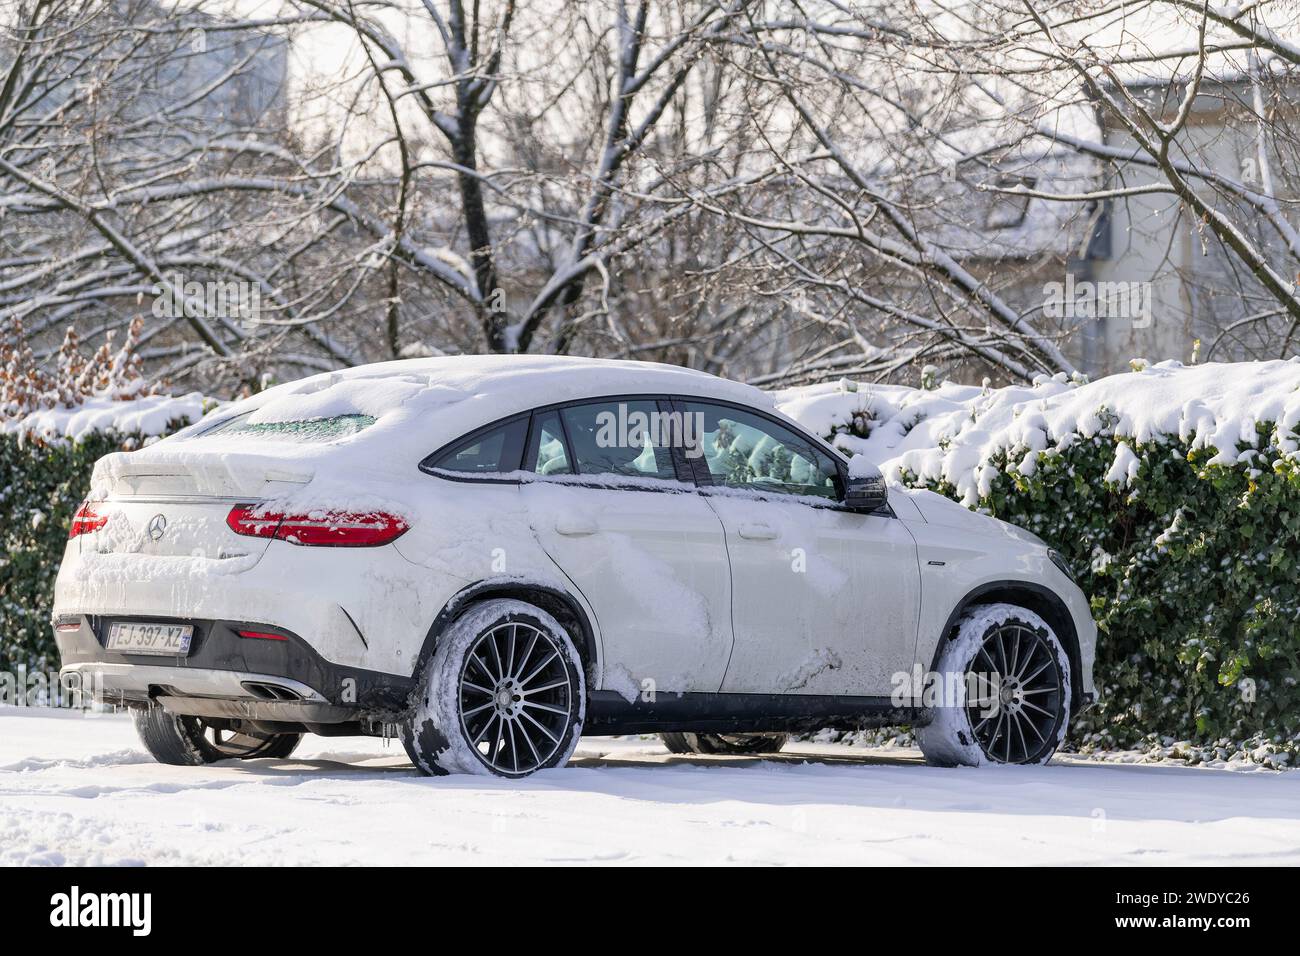 Nancy, France - White Mercedes-Benz GLE Coupé parked on the street with snow. Stock Photo